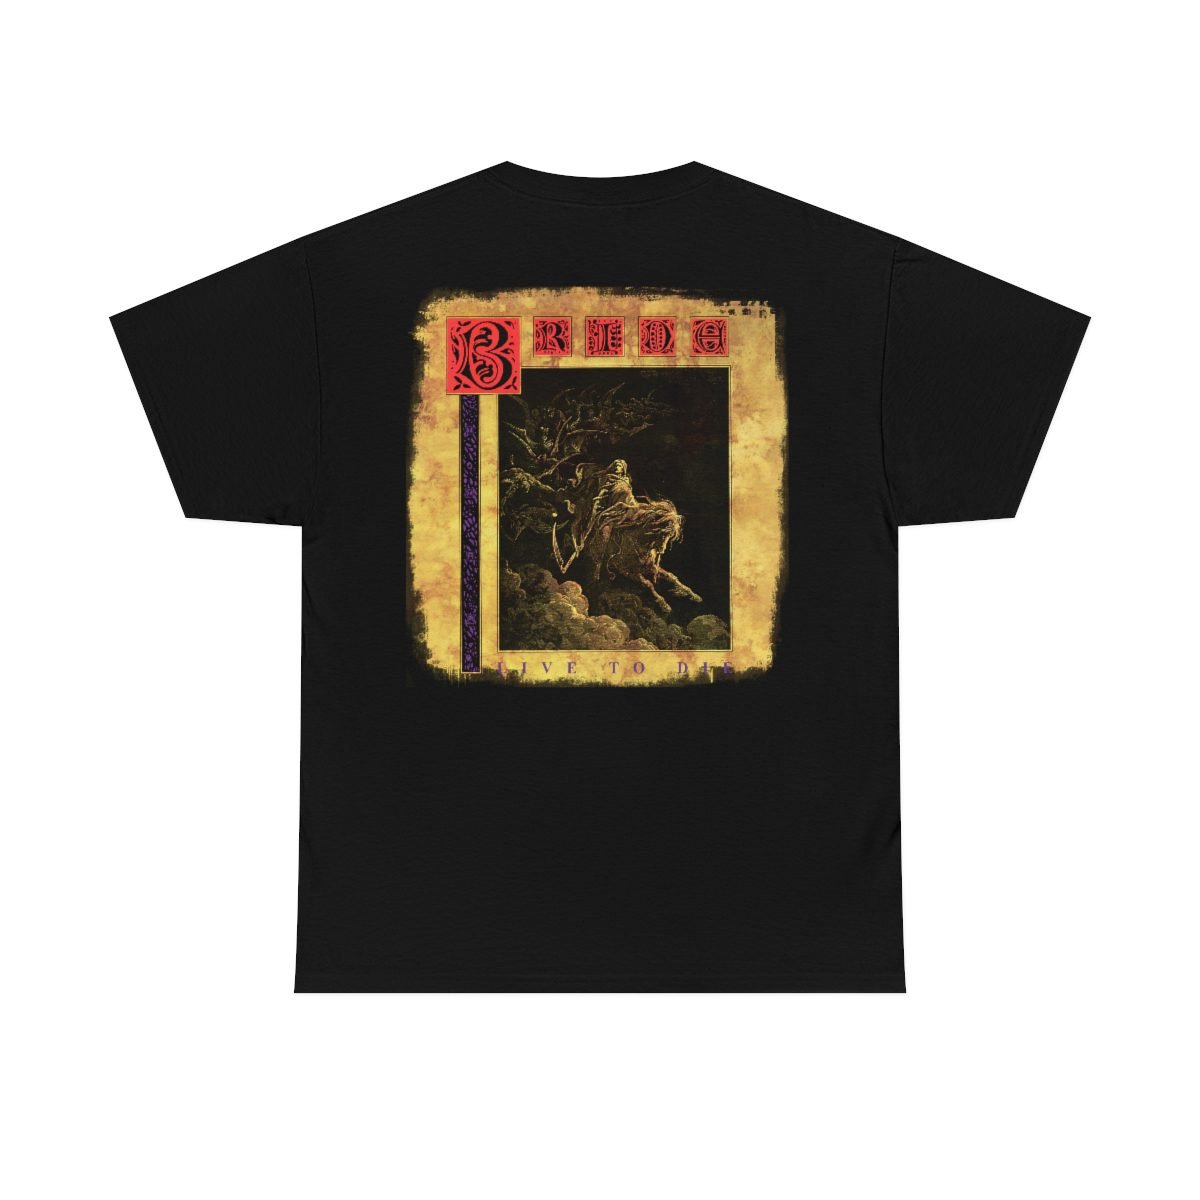 Bride – Live to Die Two Sided Short Sleeve Tshirt (5000D)